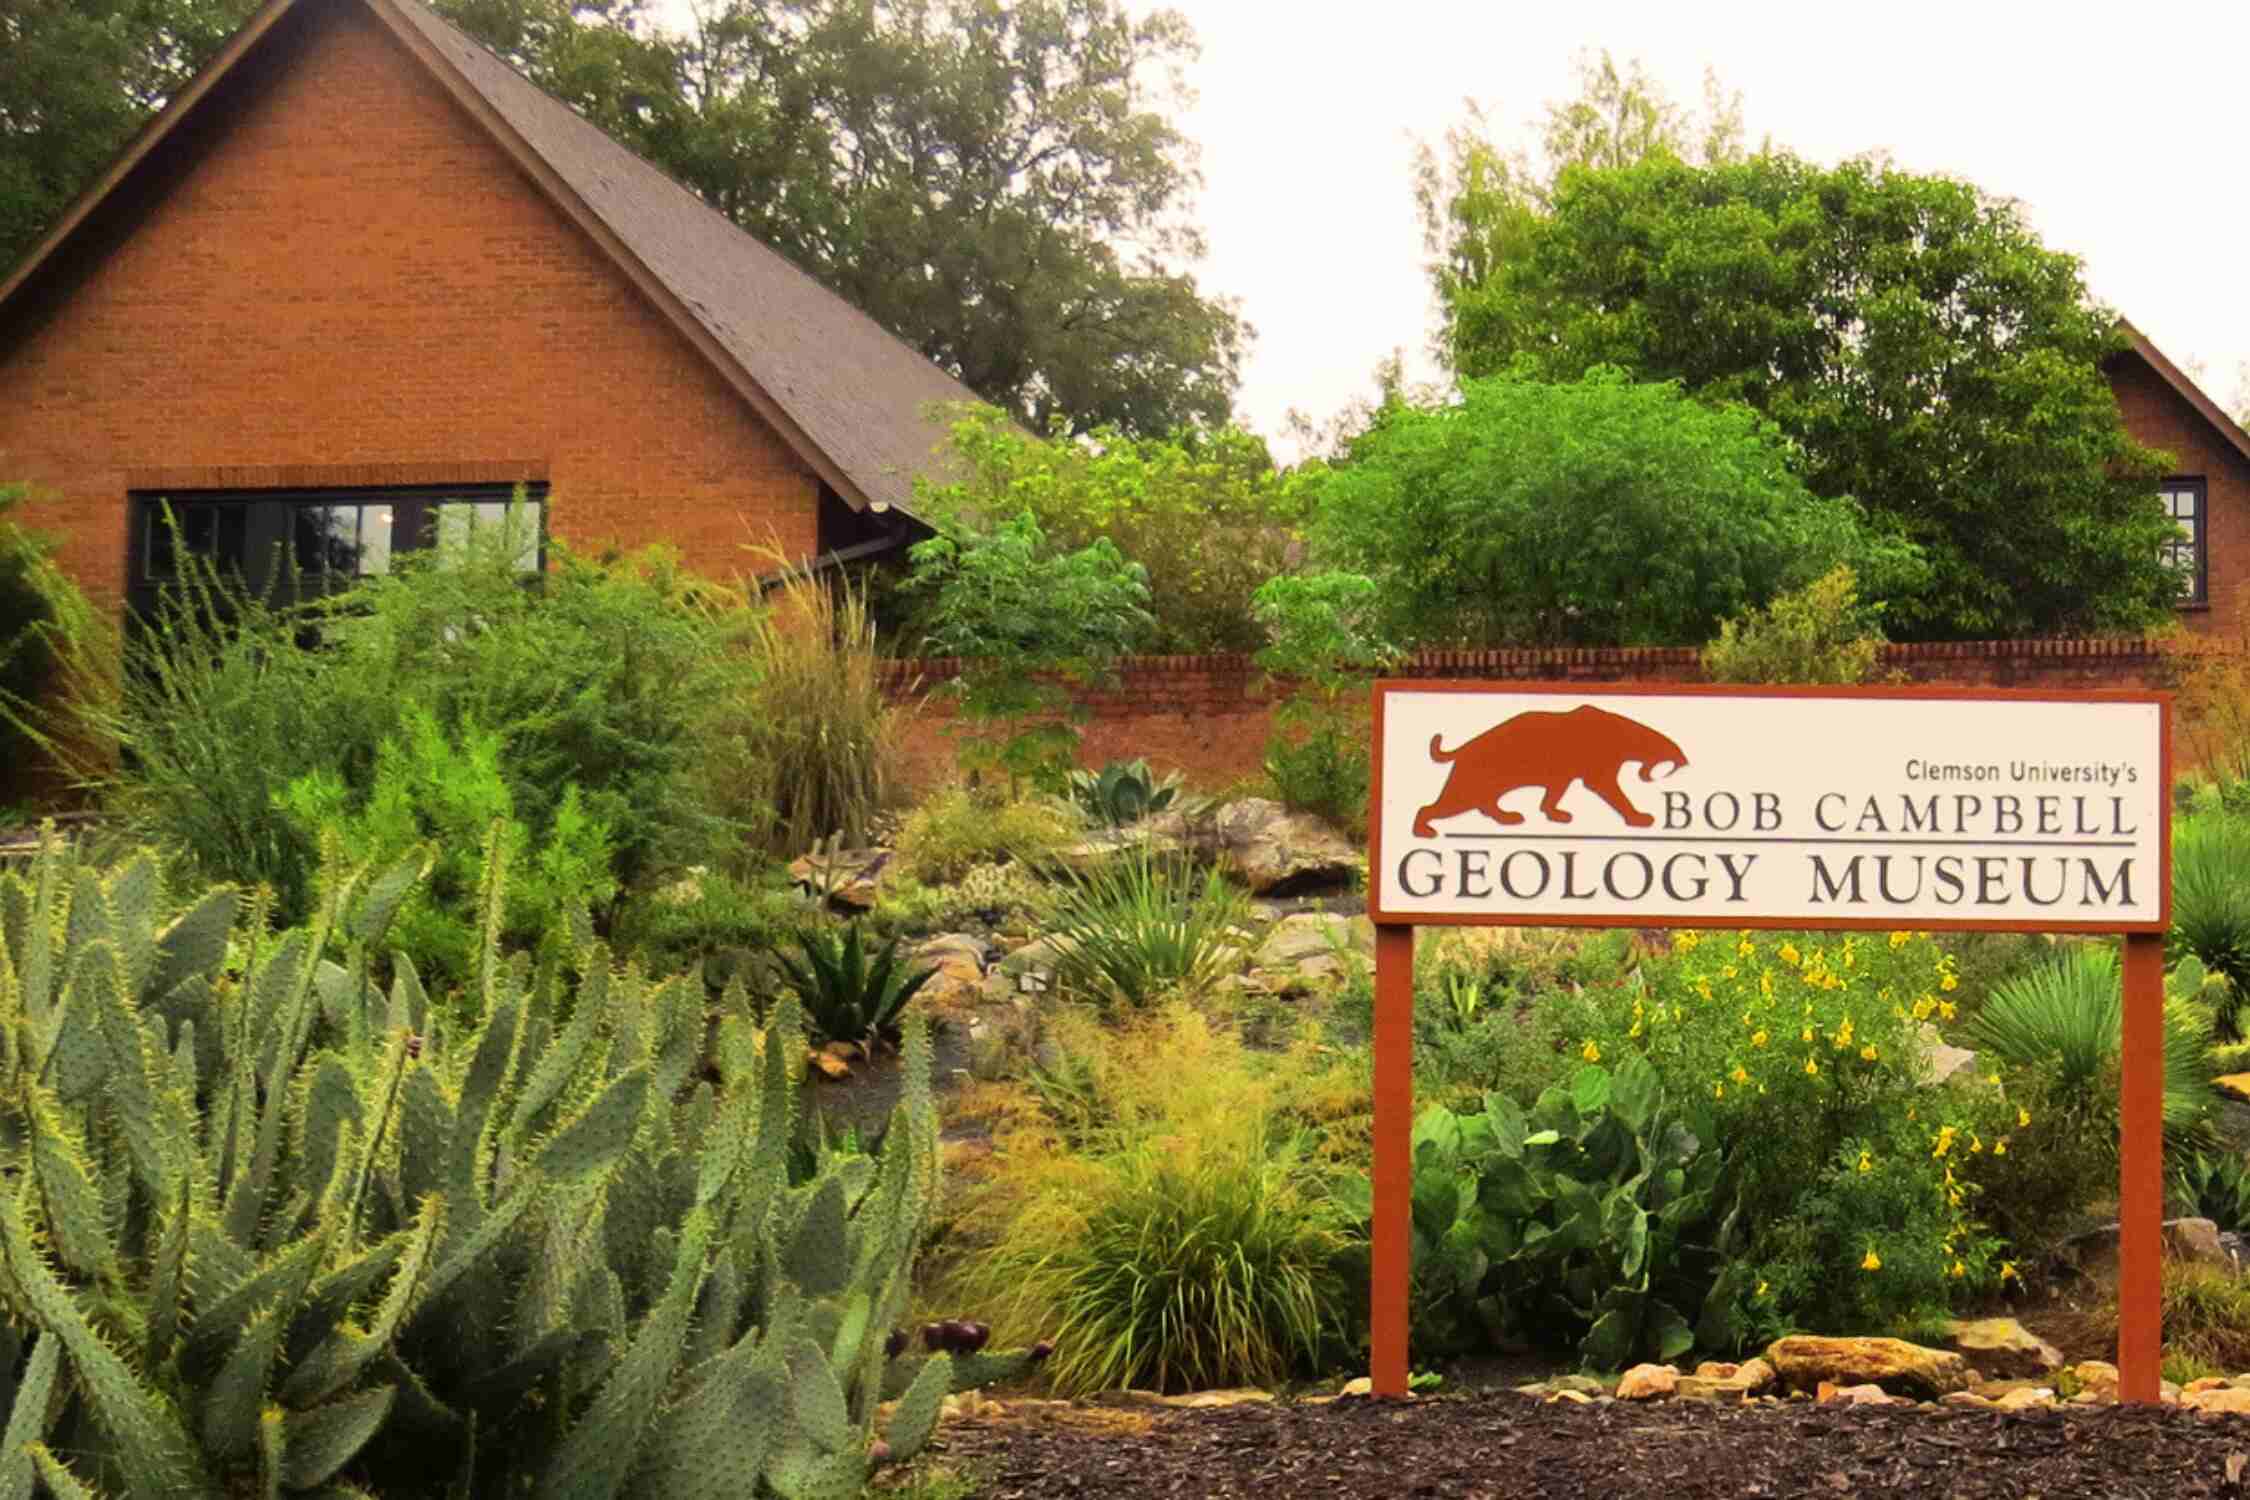 The Bob Campbell Geology Museum